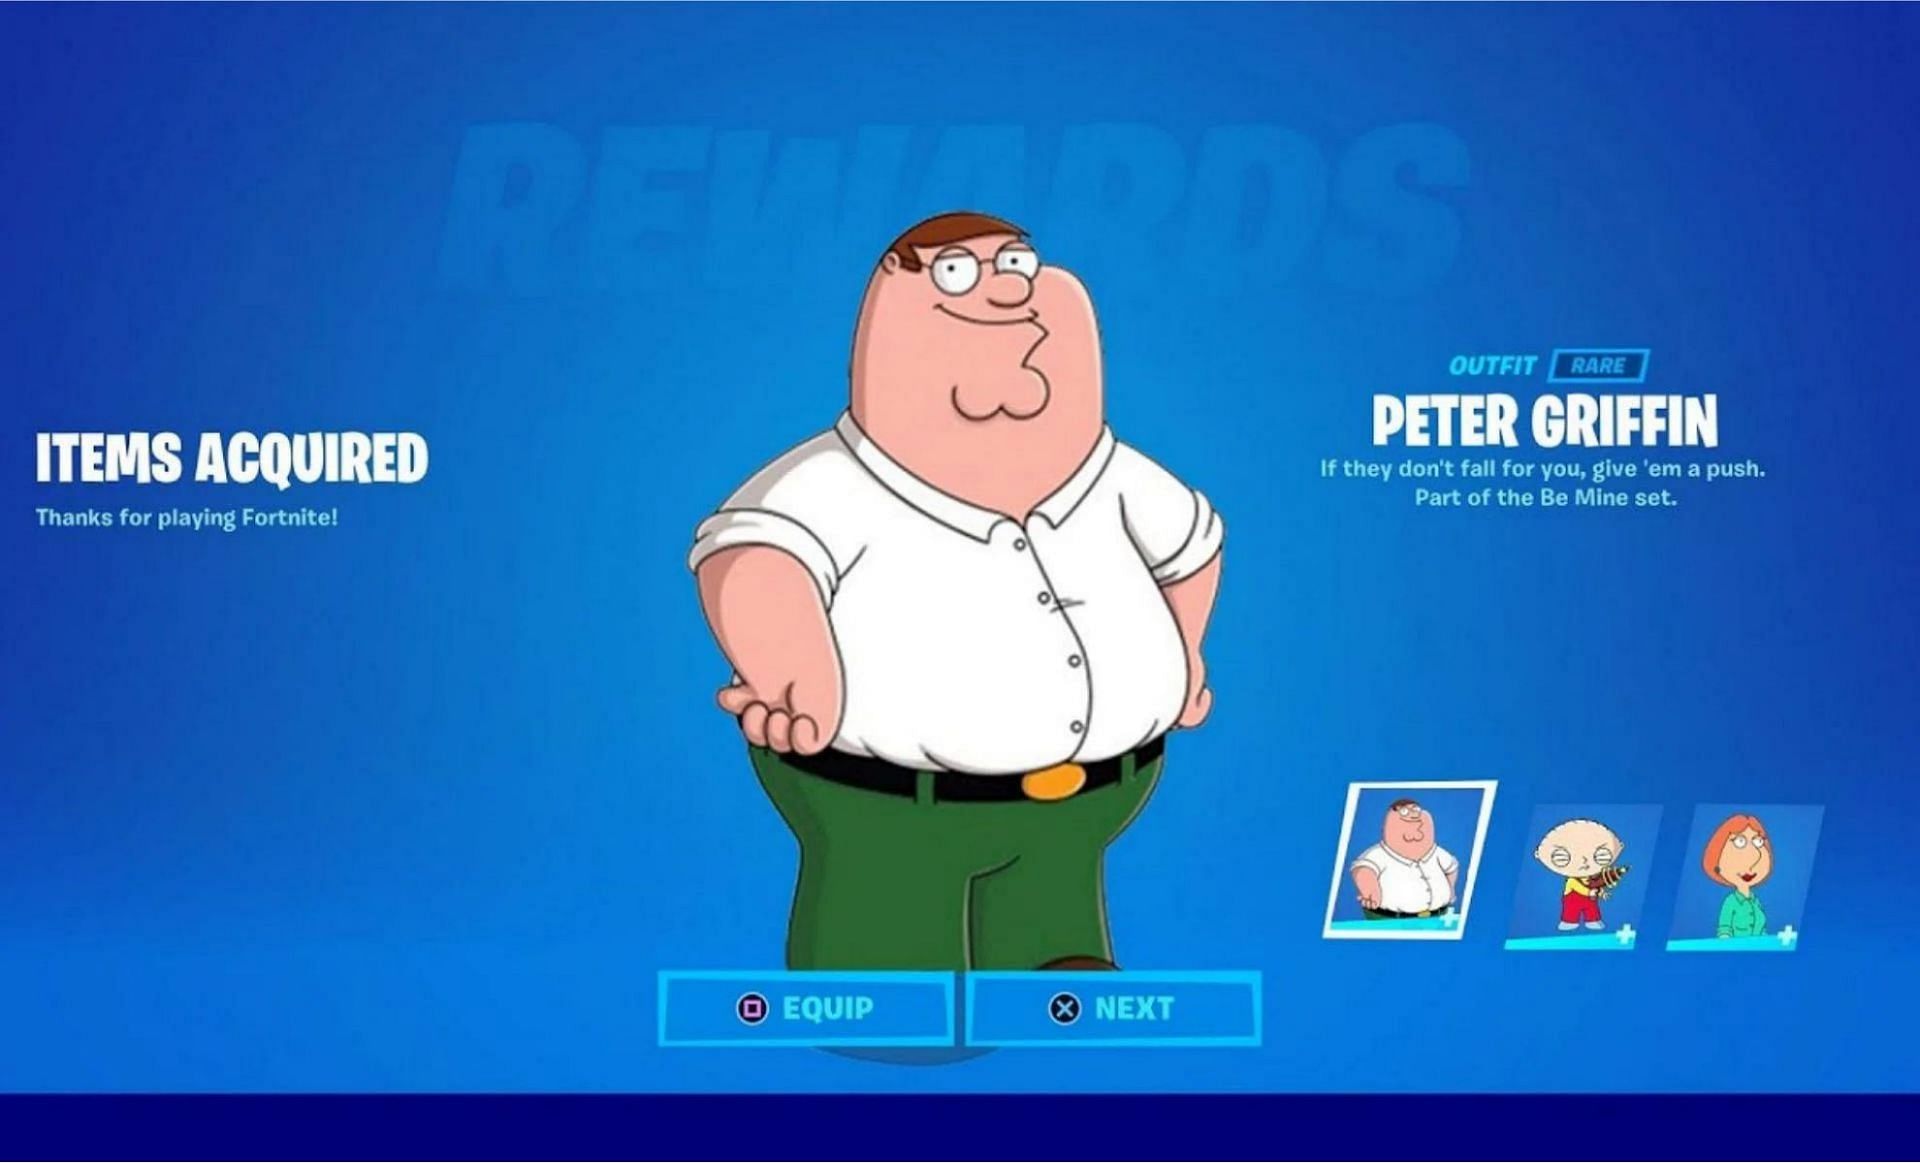 Peter Griffin skin concept (Image via Pack A Puncher on YouTube)